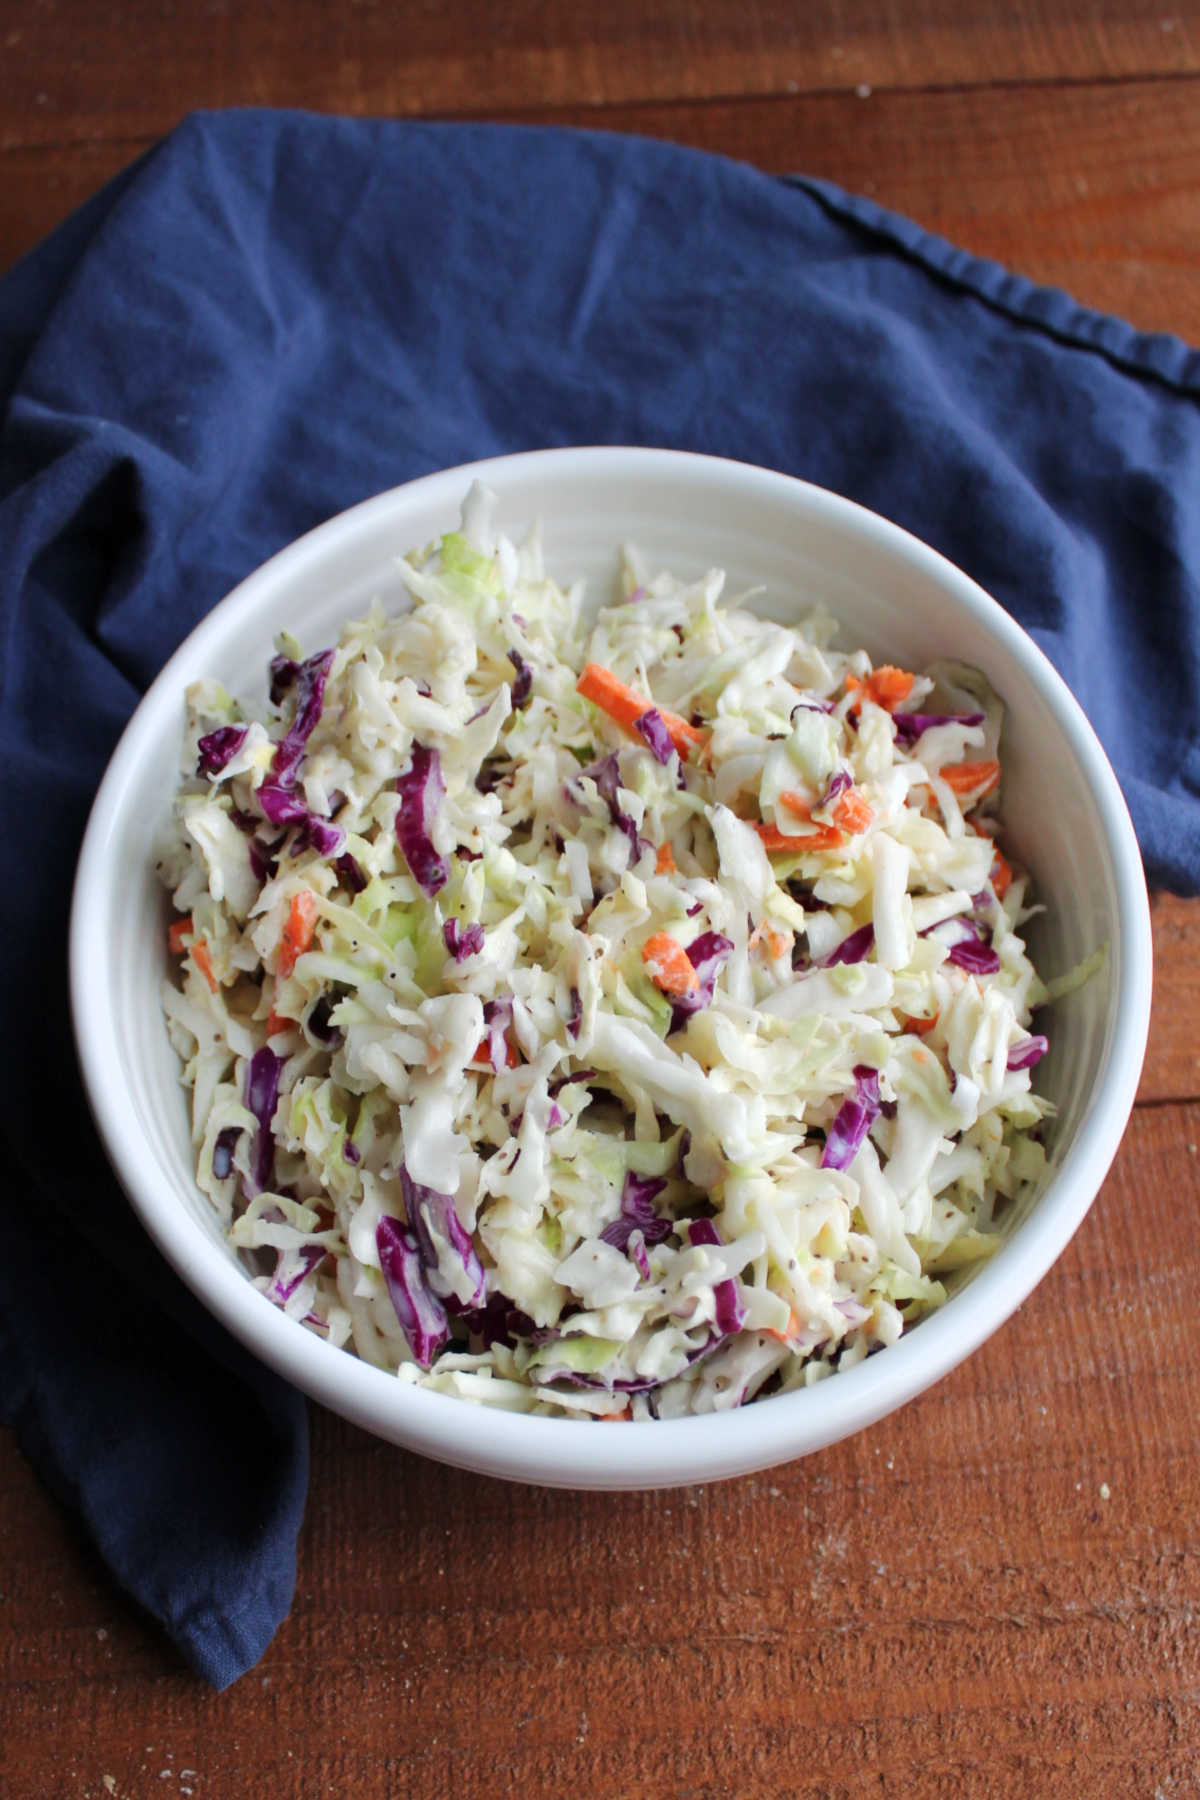 Serving bowl filled with coleslaw dressed with a creamy homemade condensed milk dressing.